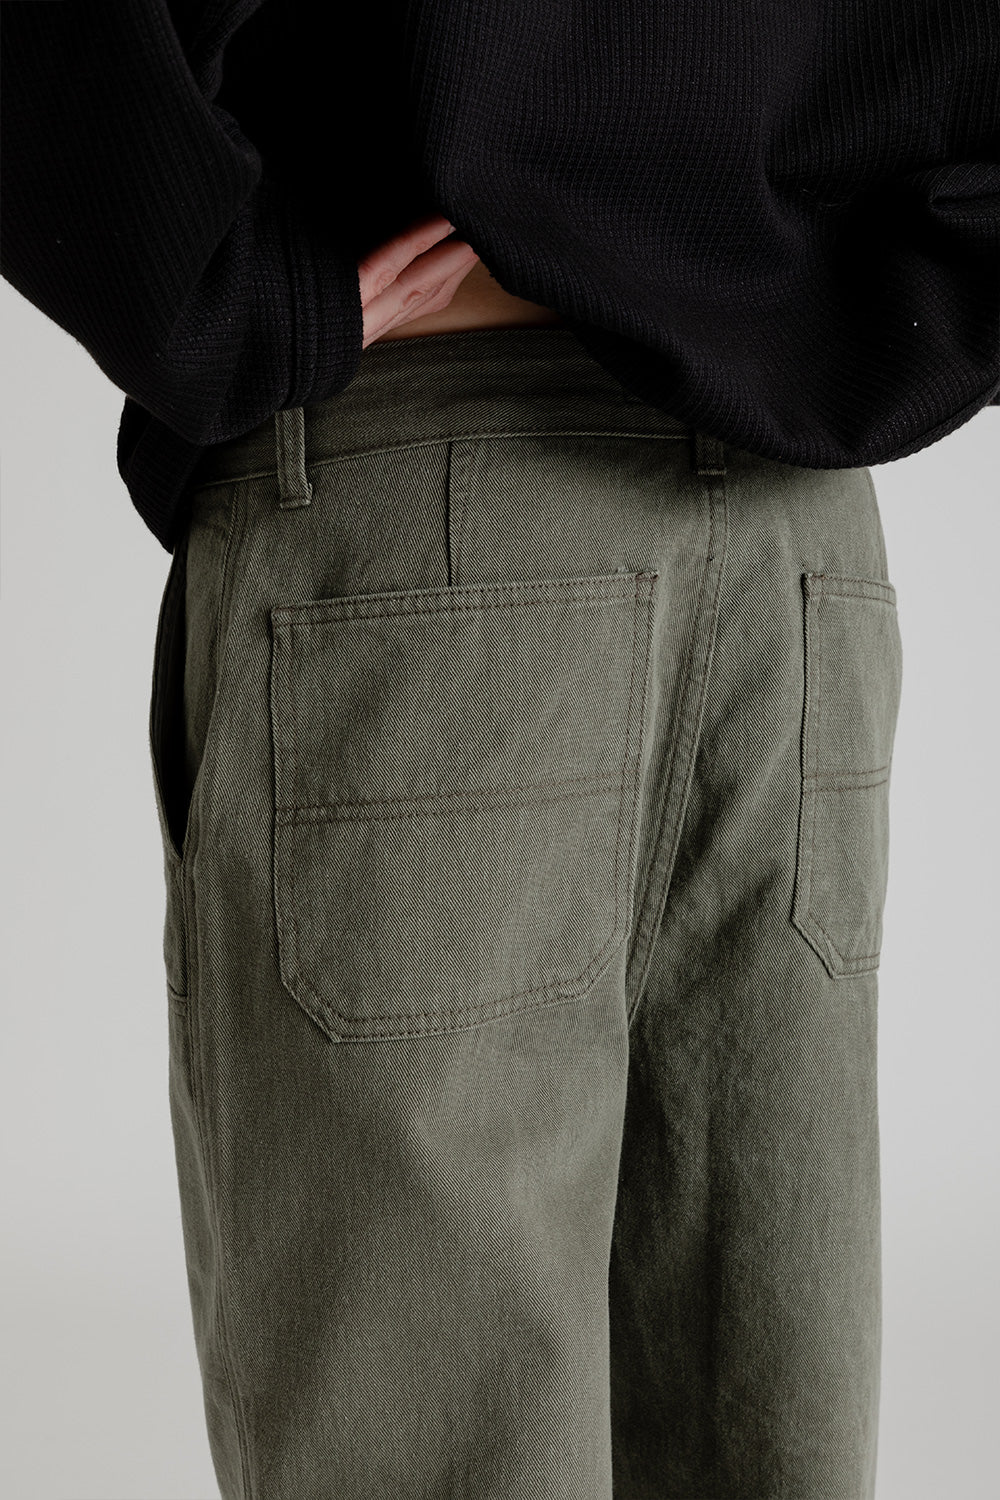 Frizmworks Double Knee Relaxed Pants in Olive